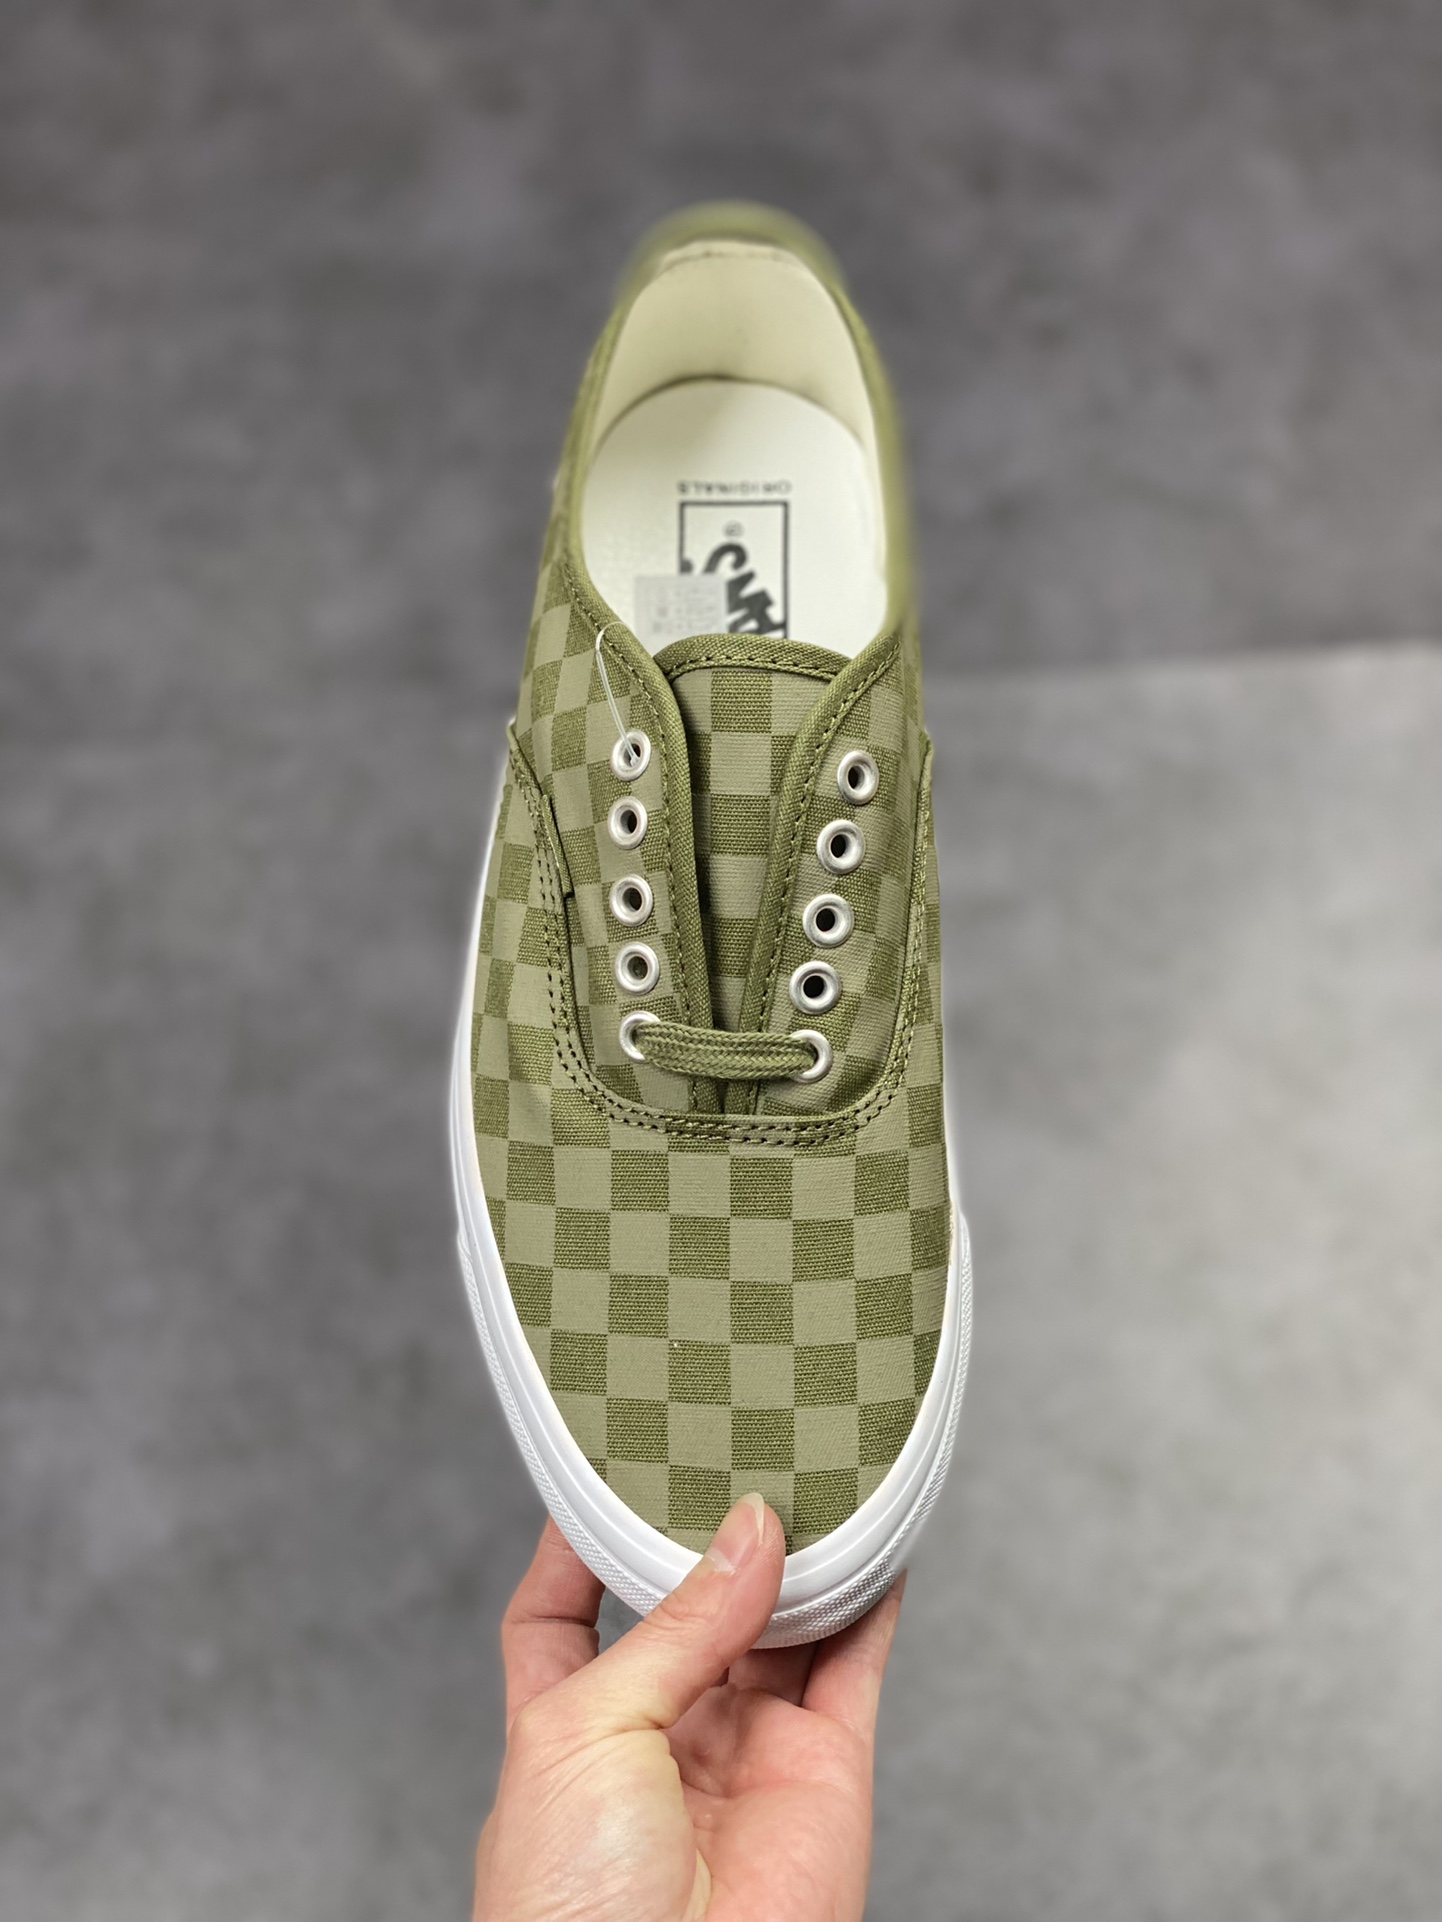 VANS OG Authentic Vans retro military green checkerboard men's and women's low-cut sneakers VN0A5FBD0VW